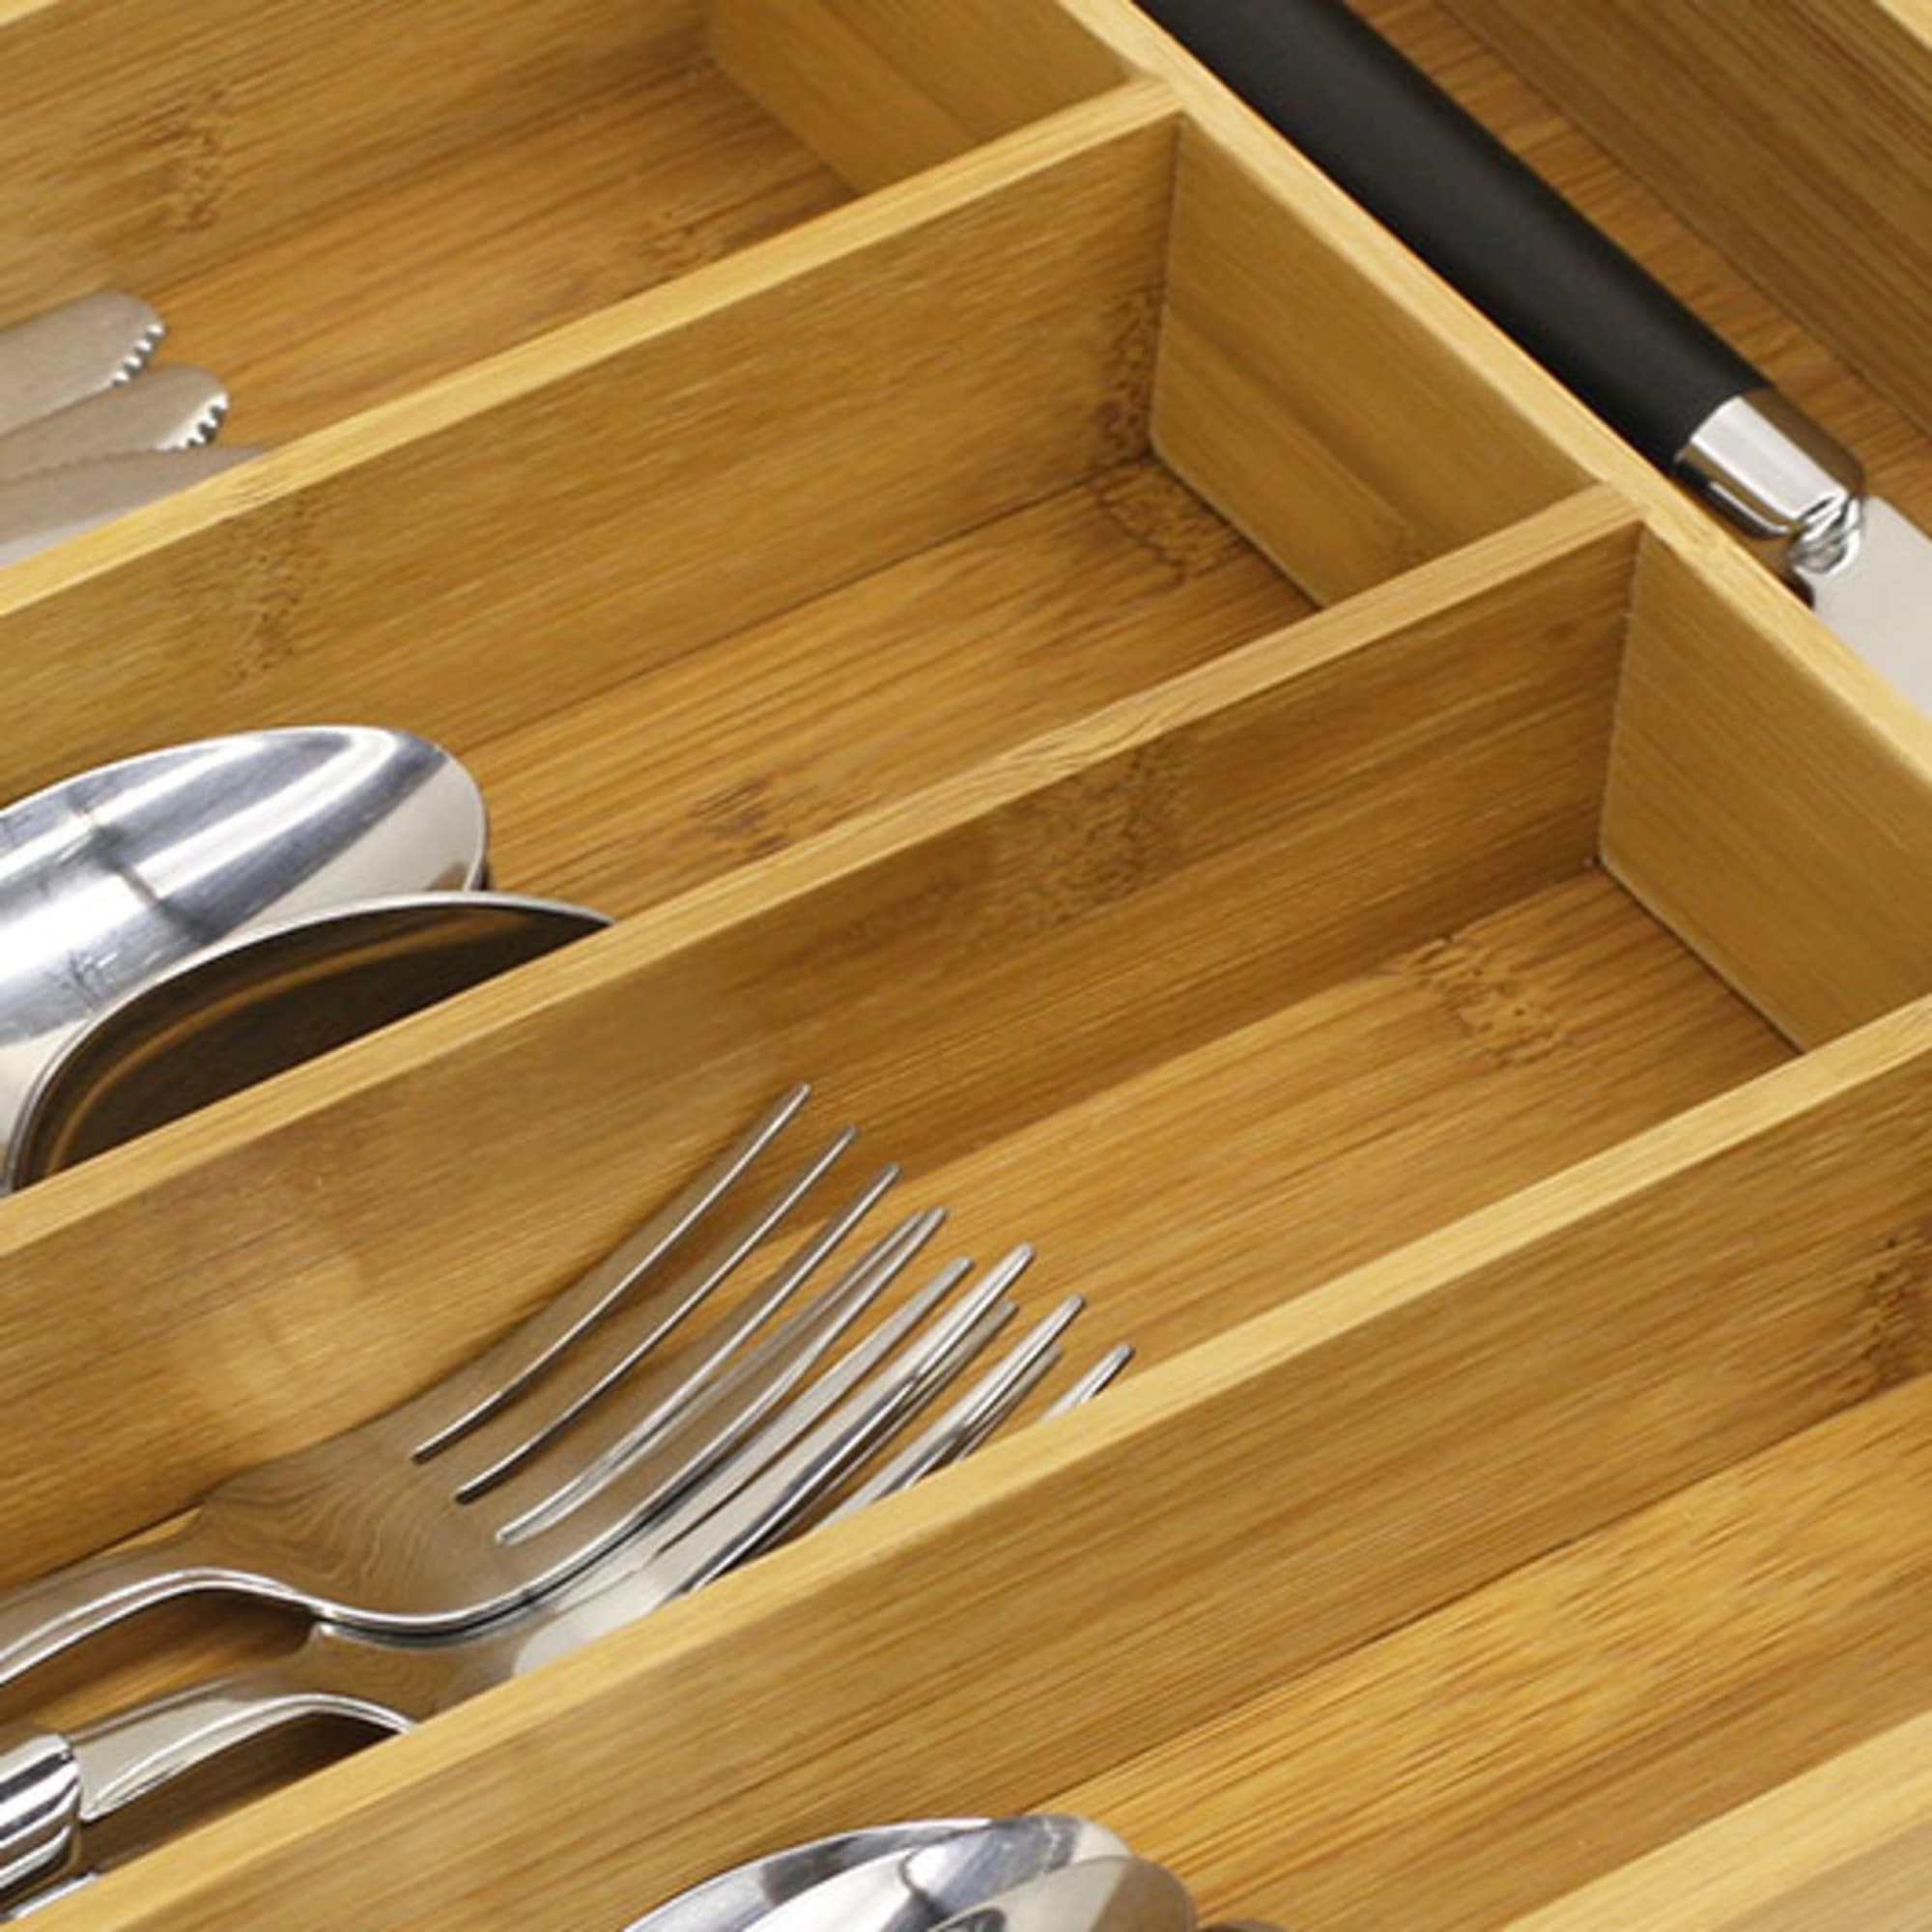 Utensil Drawer Organizer, Sold by at Home